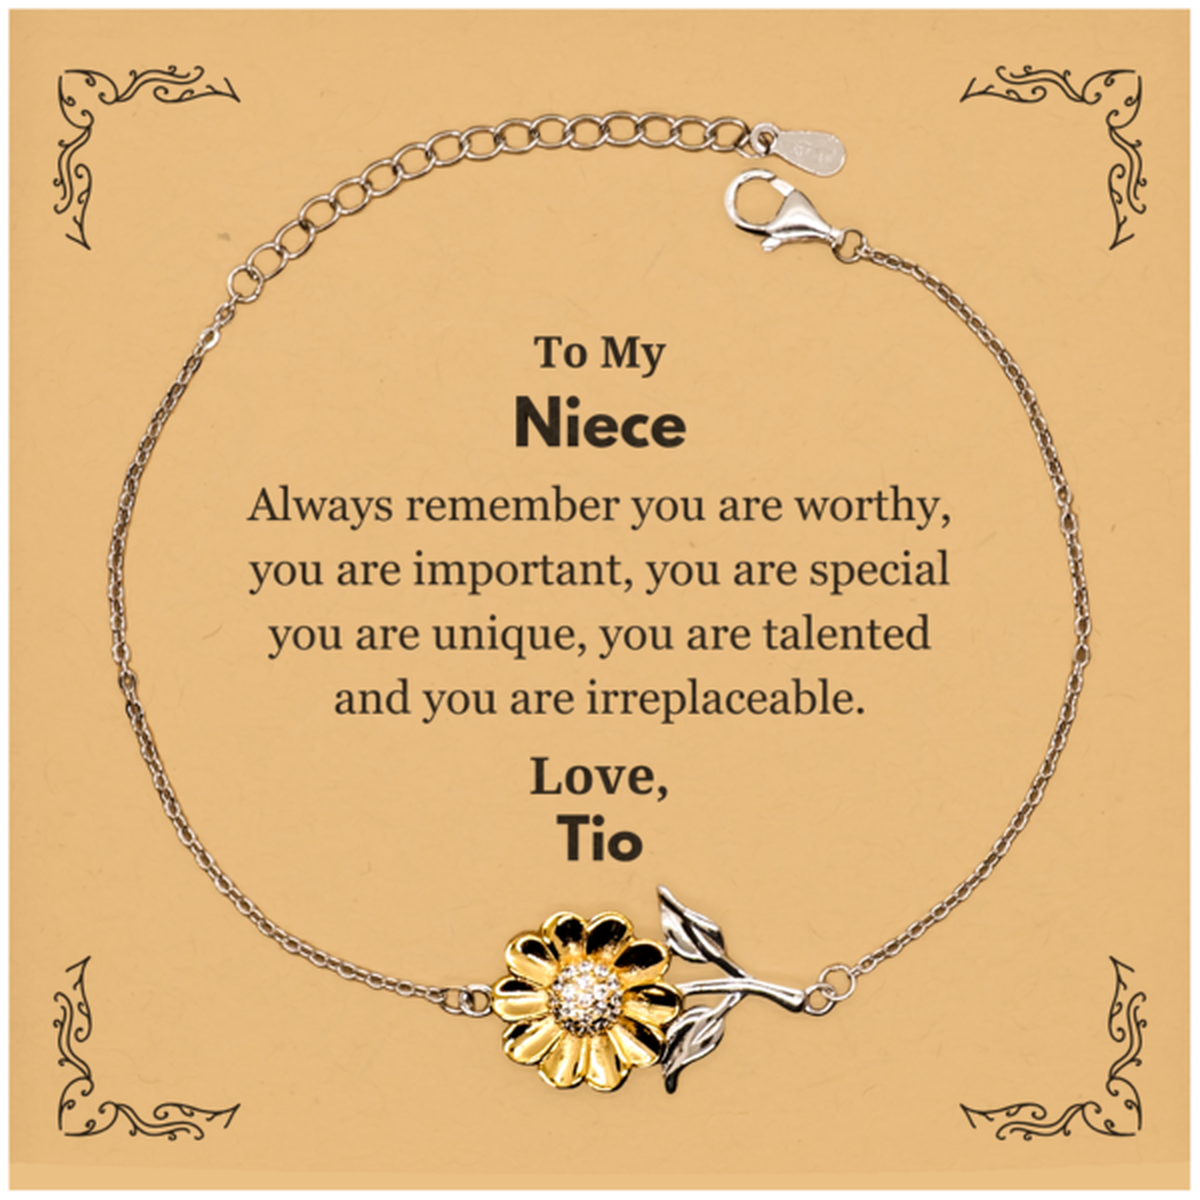 Niece Birthday Gifts from Tio, Inspirational Sunflower Bracelet for Niece Christmas Graduation Gifts for Niece Always remember you are worthy, you are important. Love, Tio